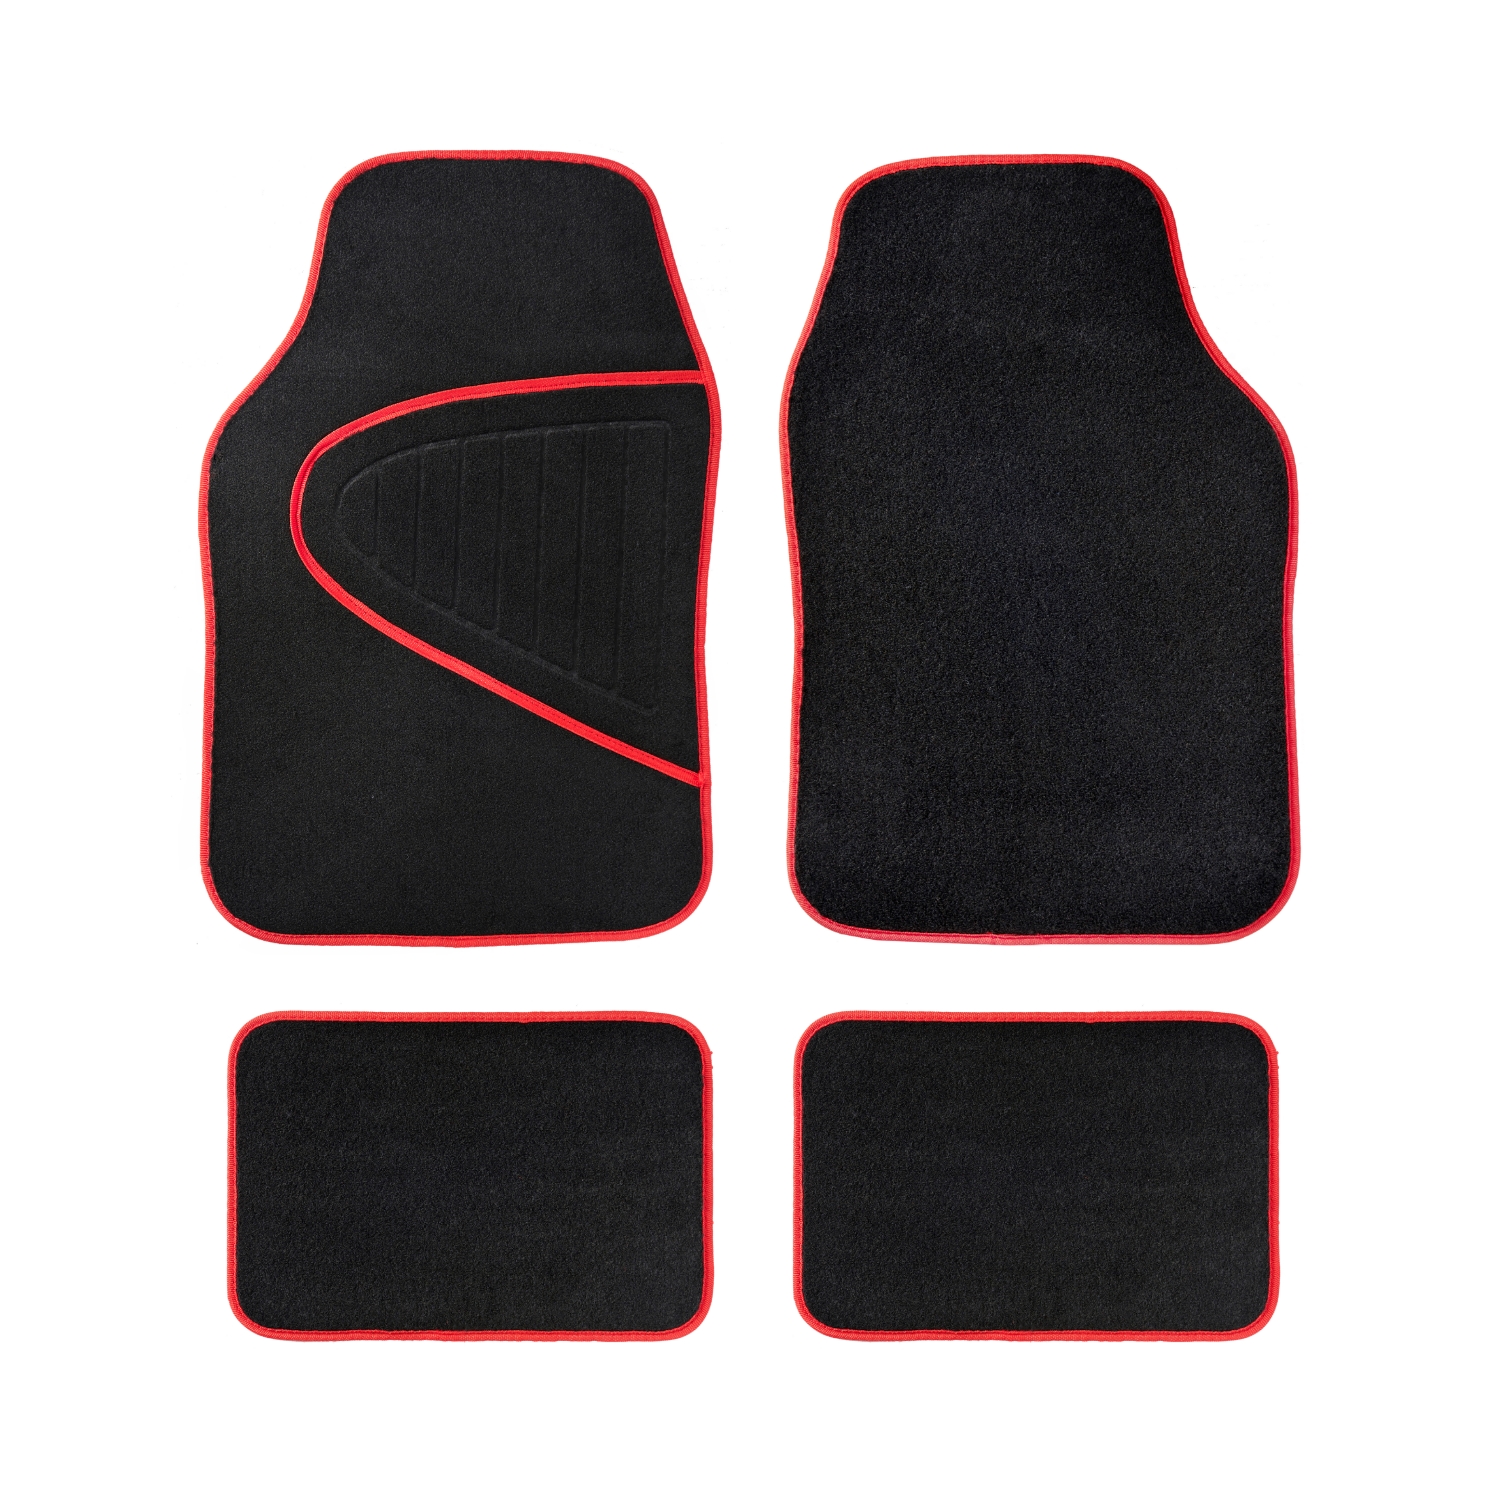 Auto Carpet Floor Mats with Colorful Outline Design Floor Liners  for Car Truck Van SUV 8804